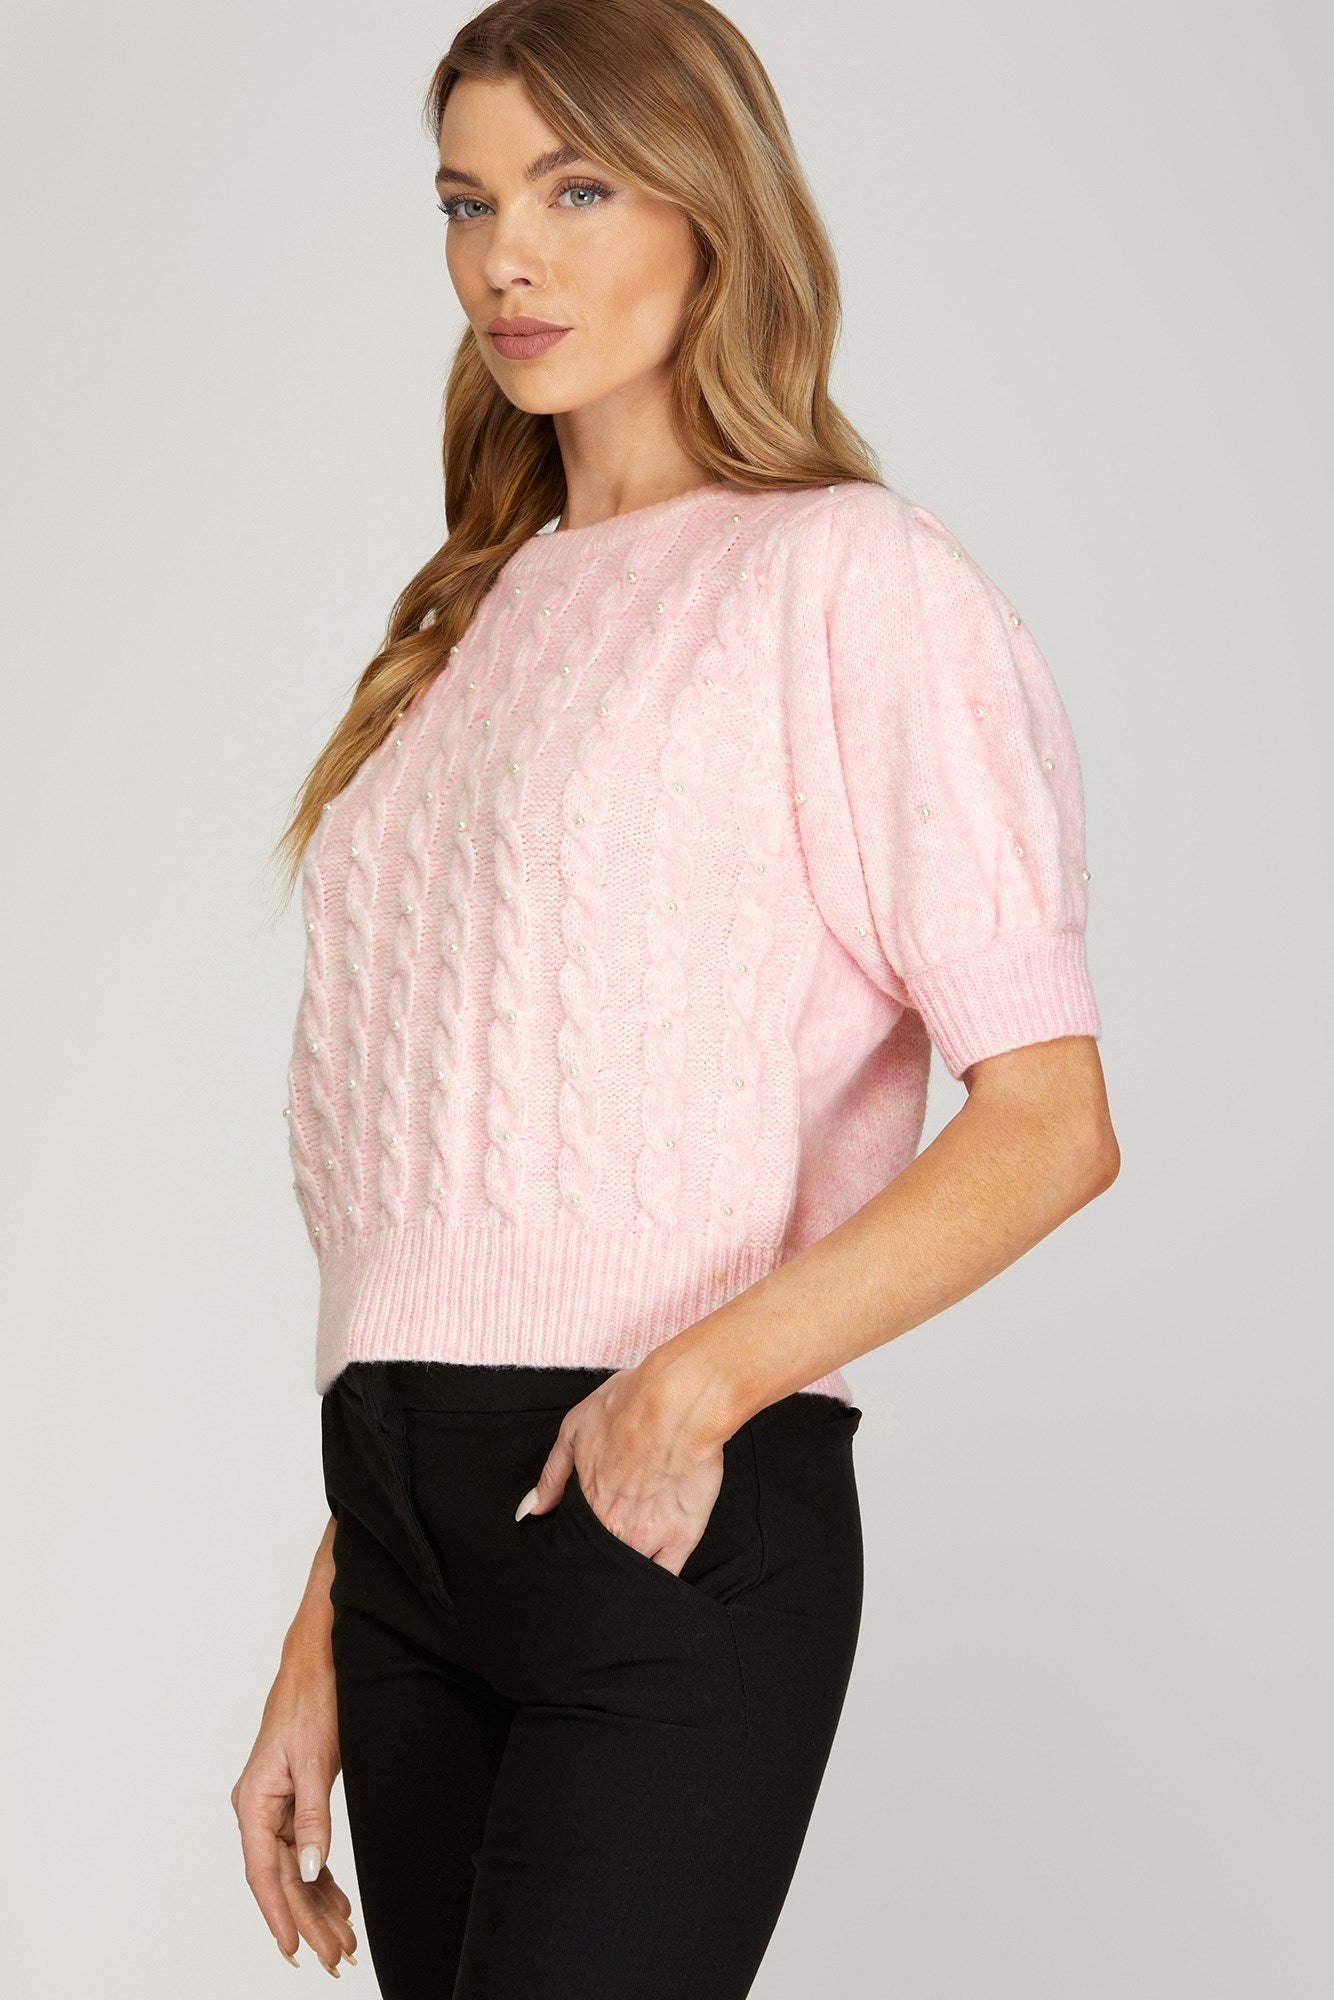 Sale Puff Sleeve Cable Knit Sweater w/Pearls